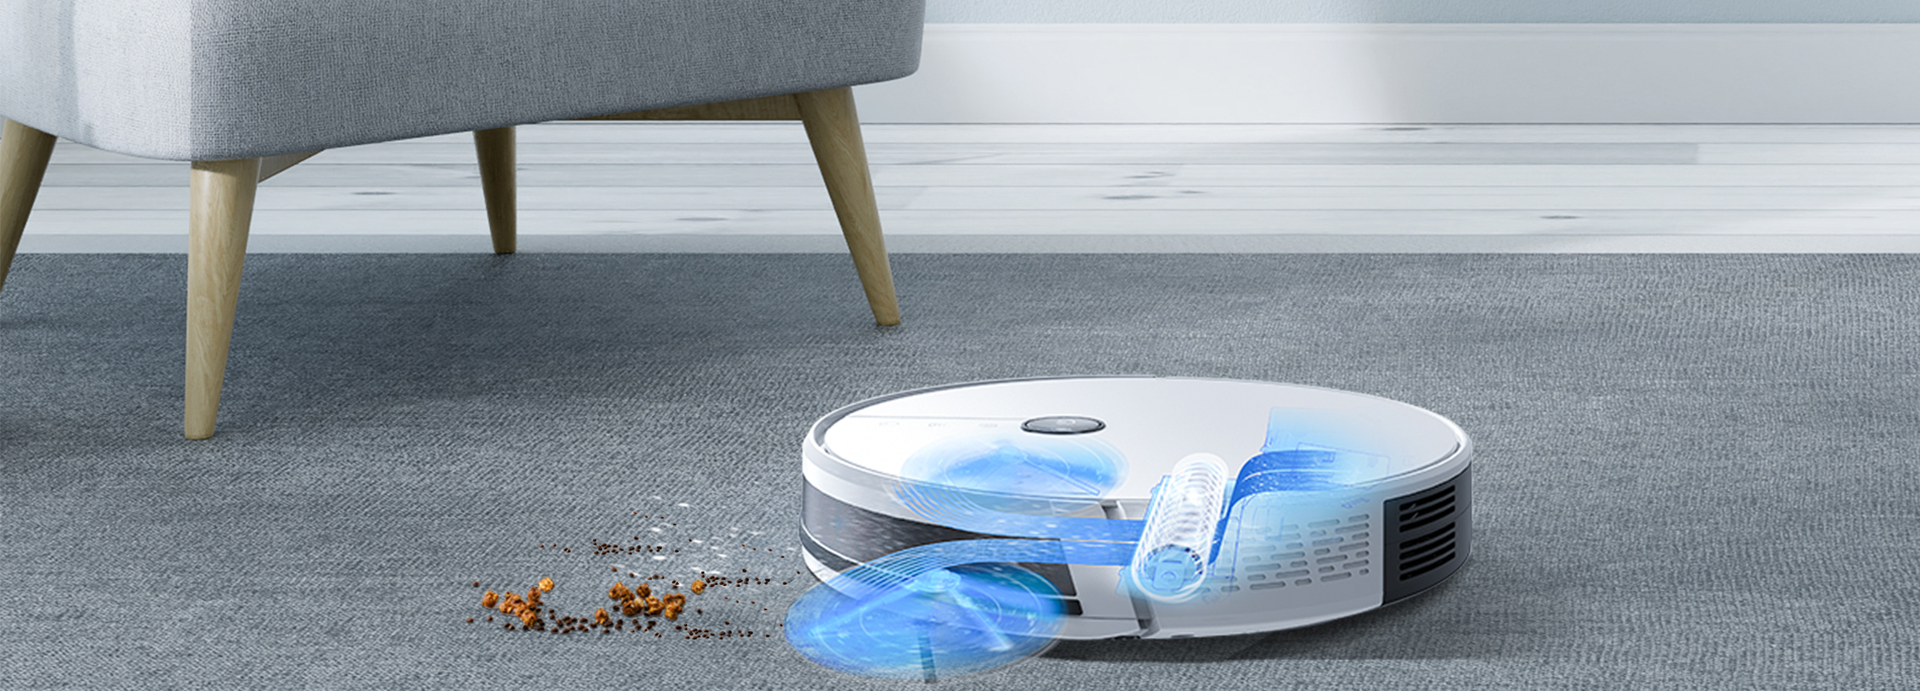 Clean Robot Vacuum Cleaning Performance